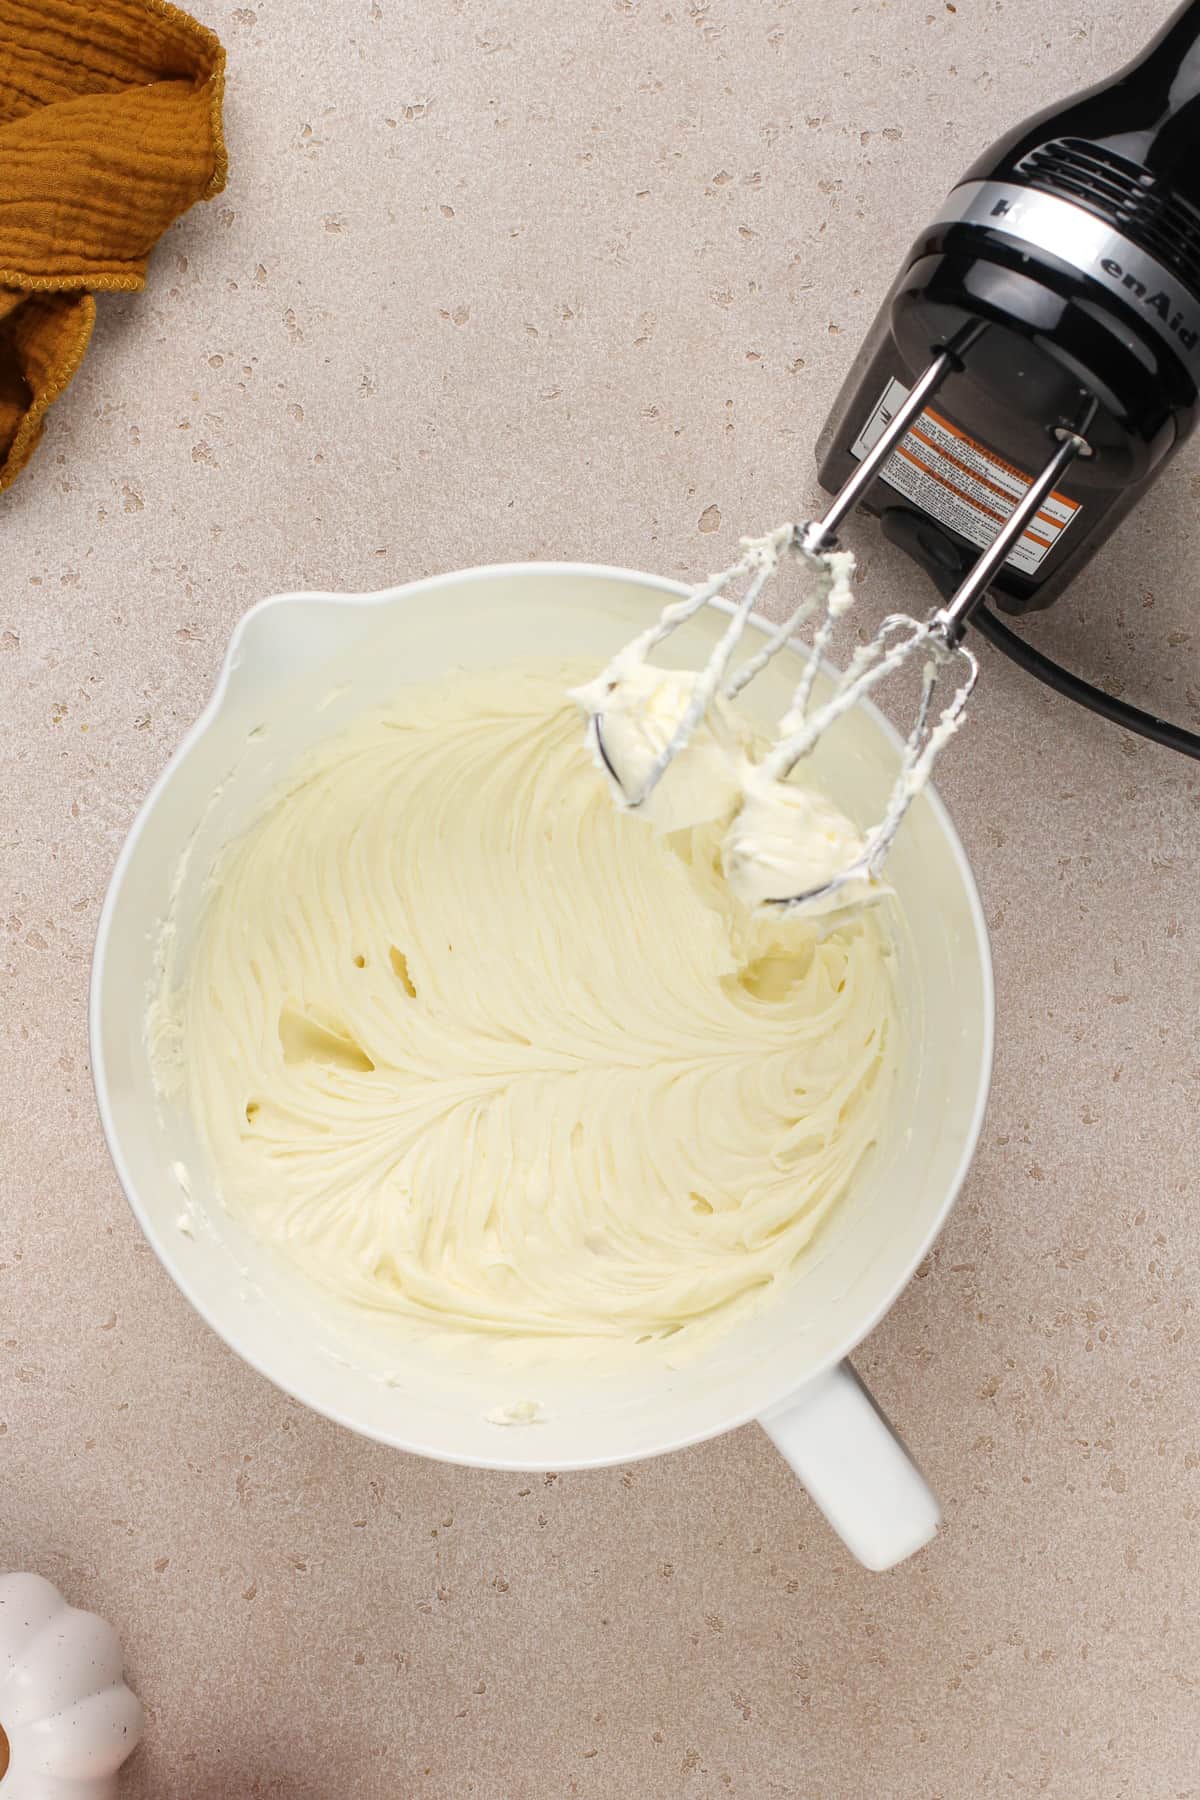 Cream cheese and sugar beaten together in a white mixing bowl.